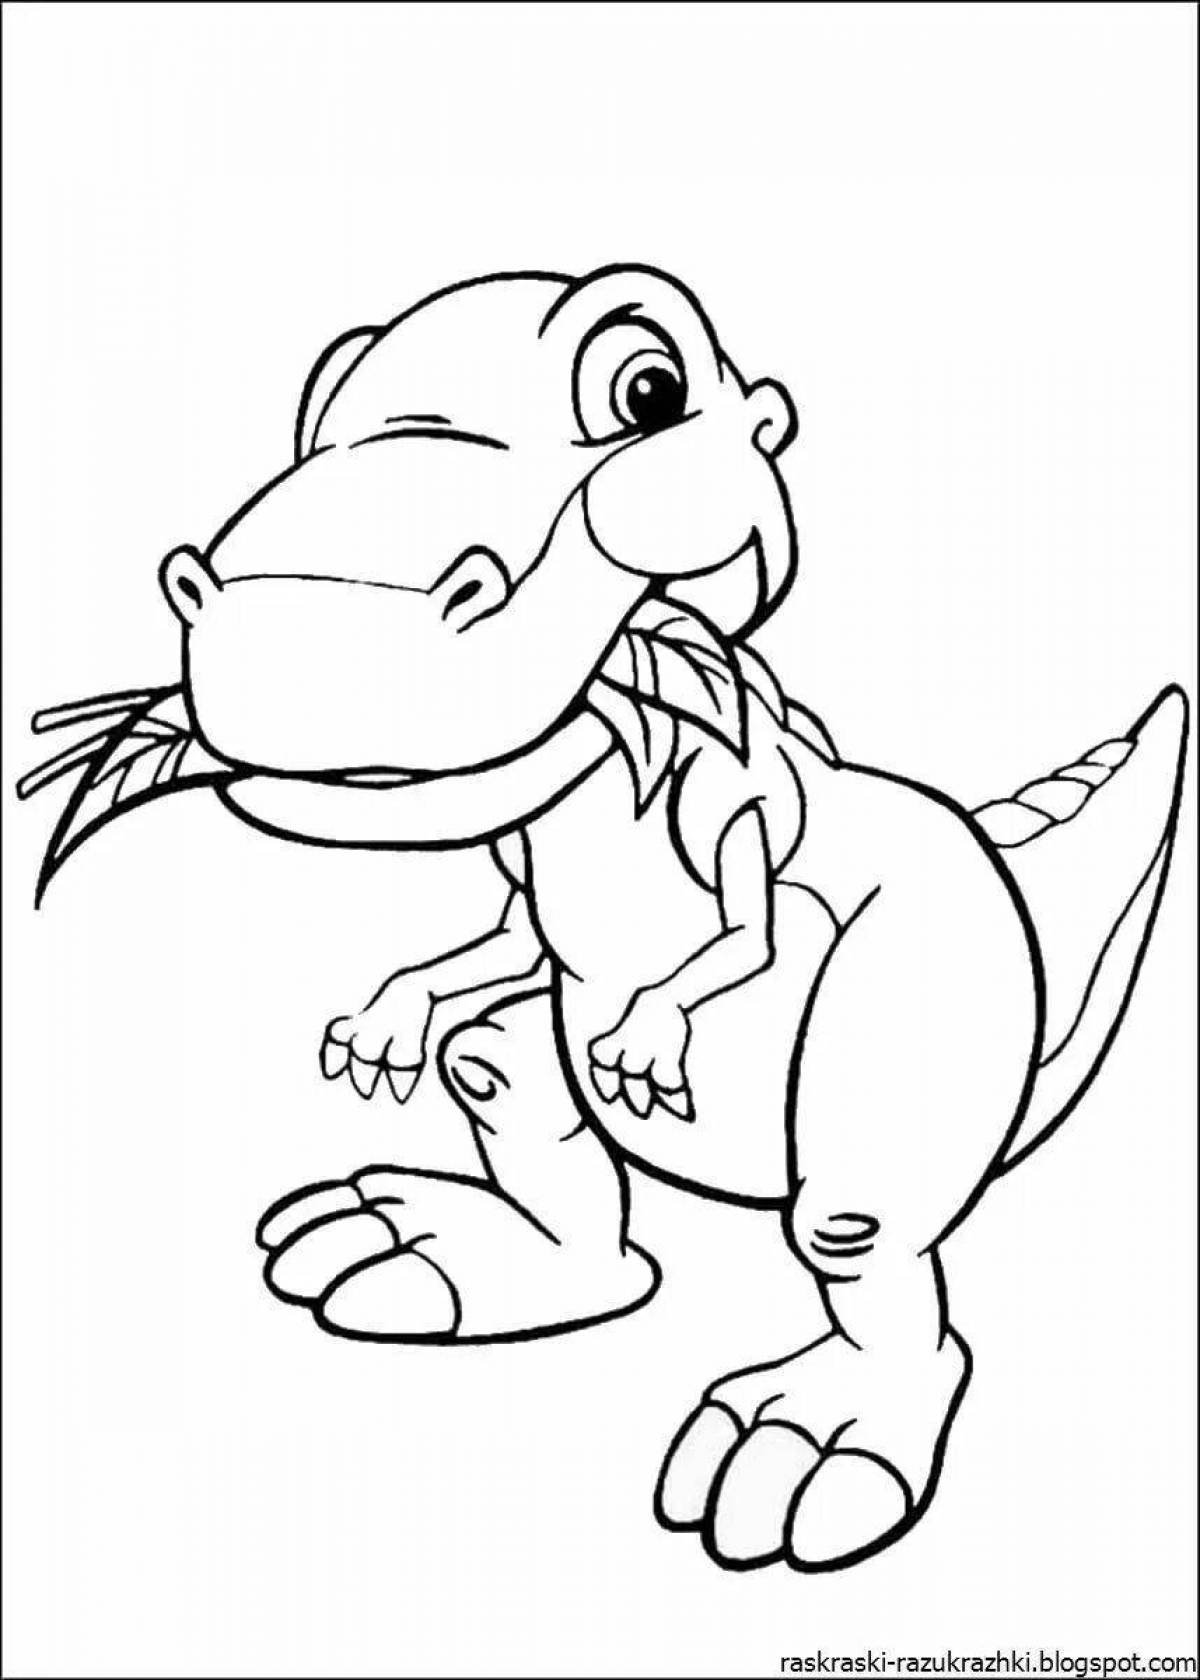 An entertaining cartoon coloring book for children 4-5 years old